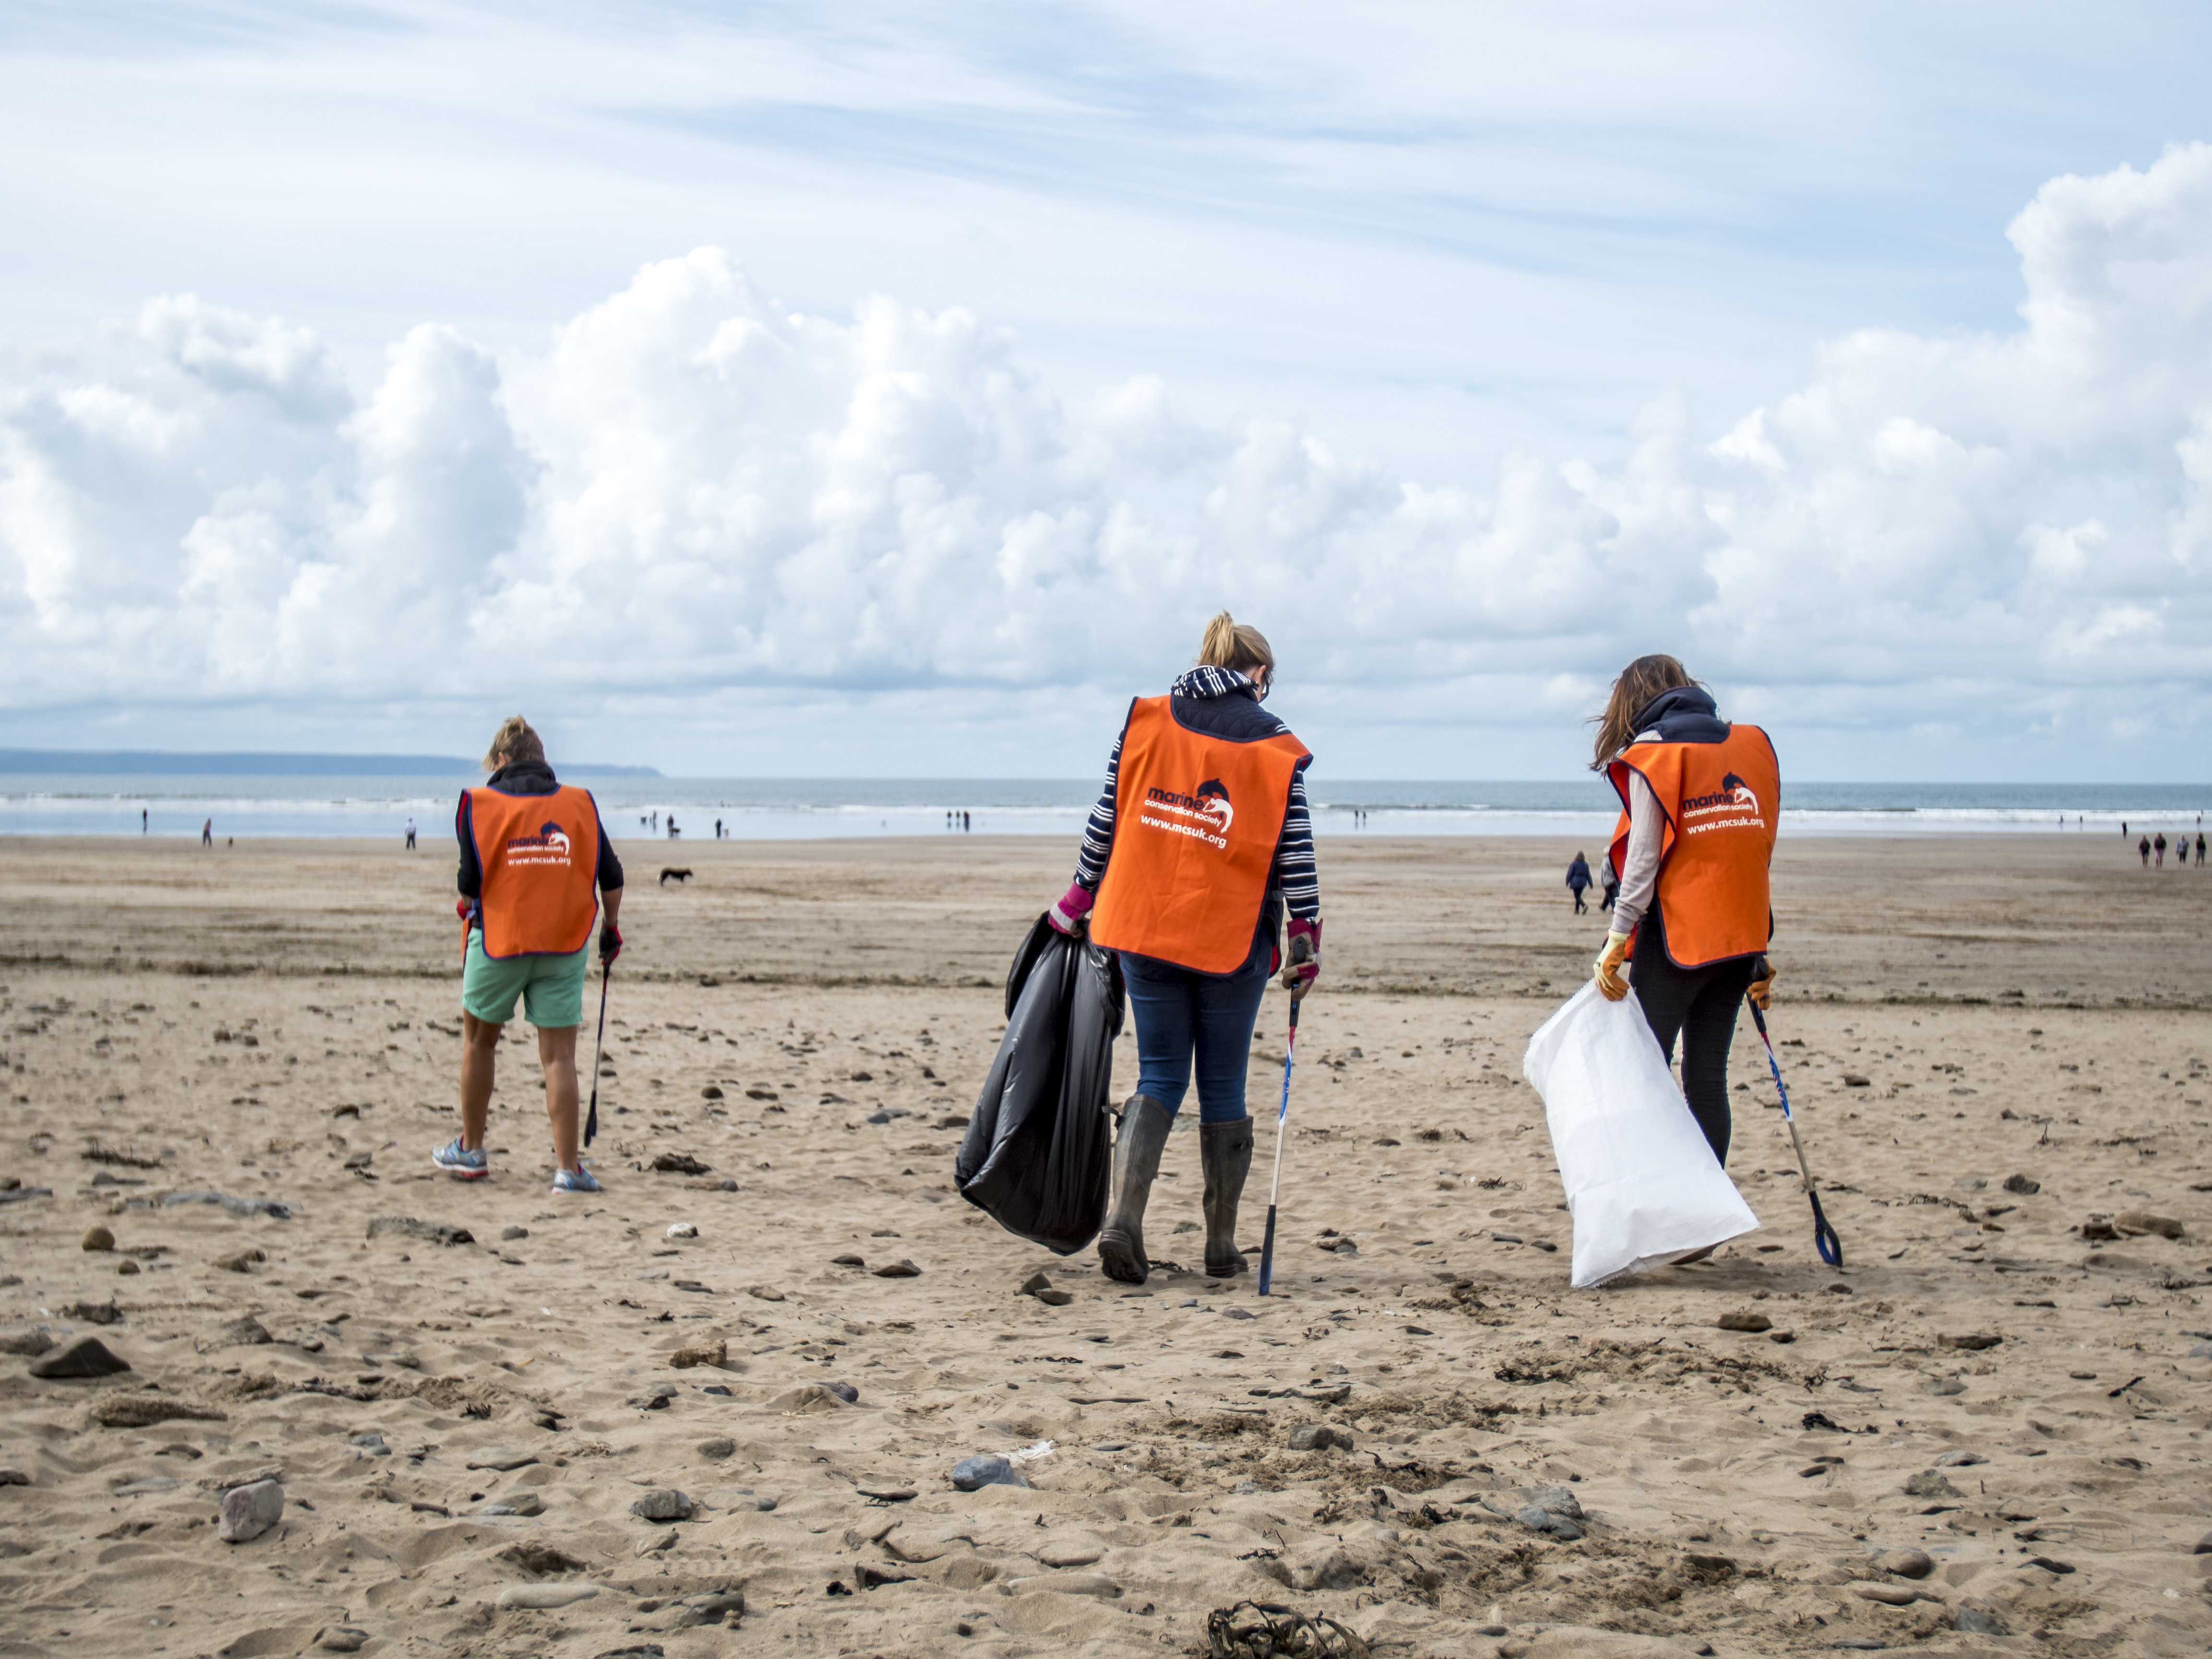 <strong>255,209 pieces of litter was collected from 339 beaches during the Marine Conservation Society&rsquo;s Great British Beach Clean this year.</strong>